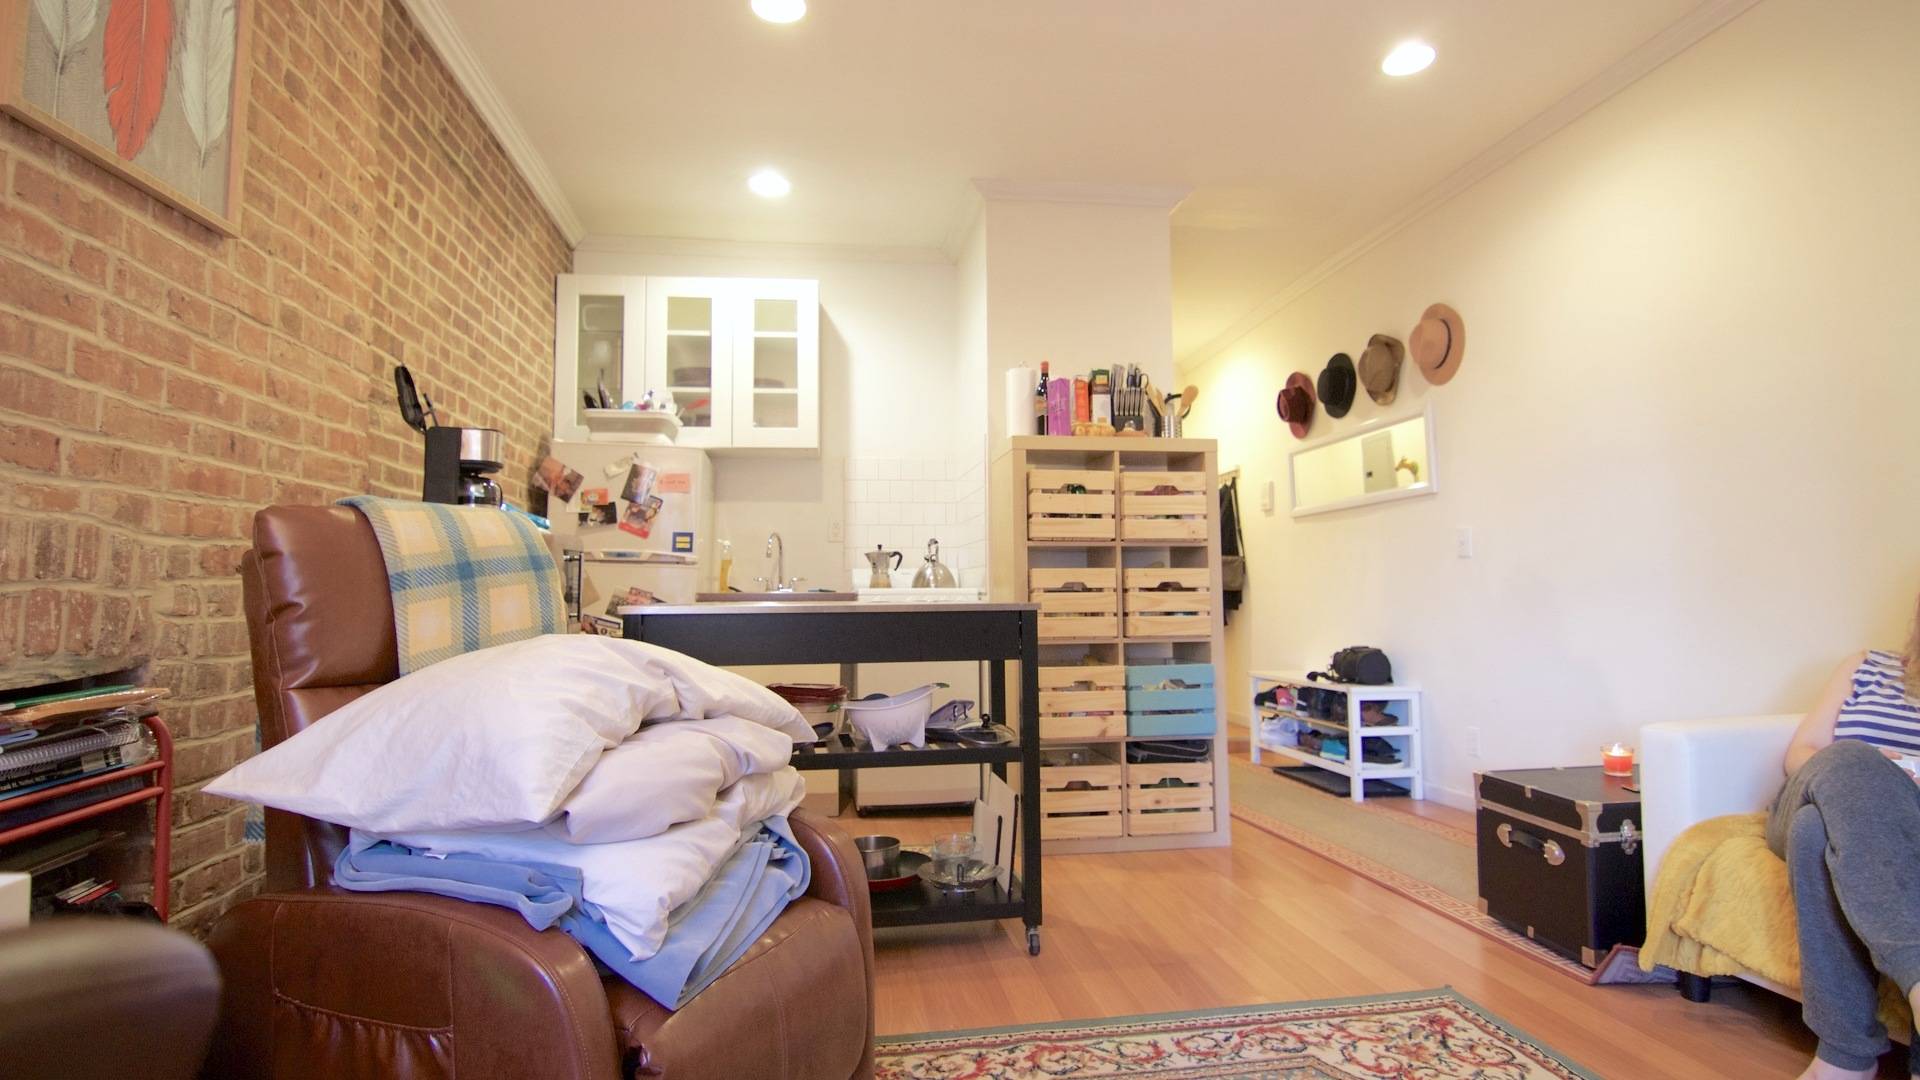 Low Fee. Charming 1 bedroom located in the heart of historic Brooklyn Heights.